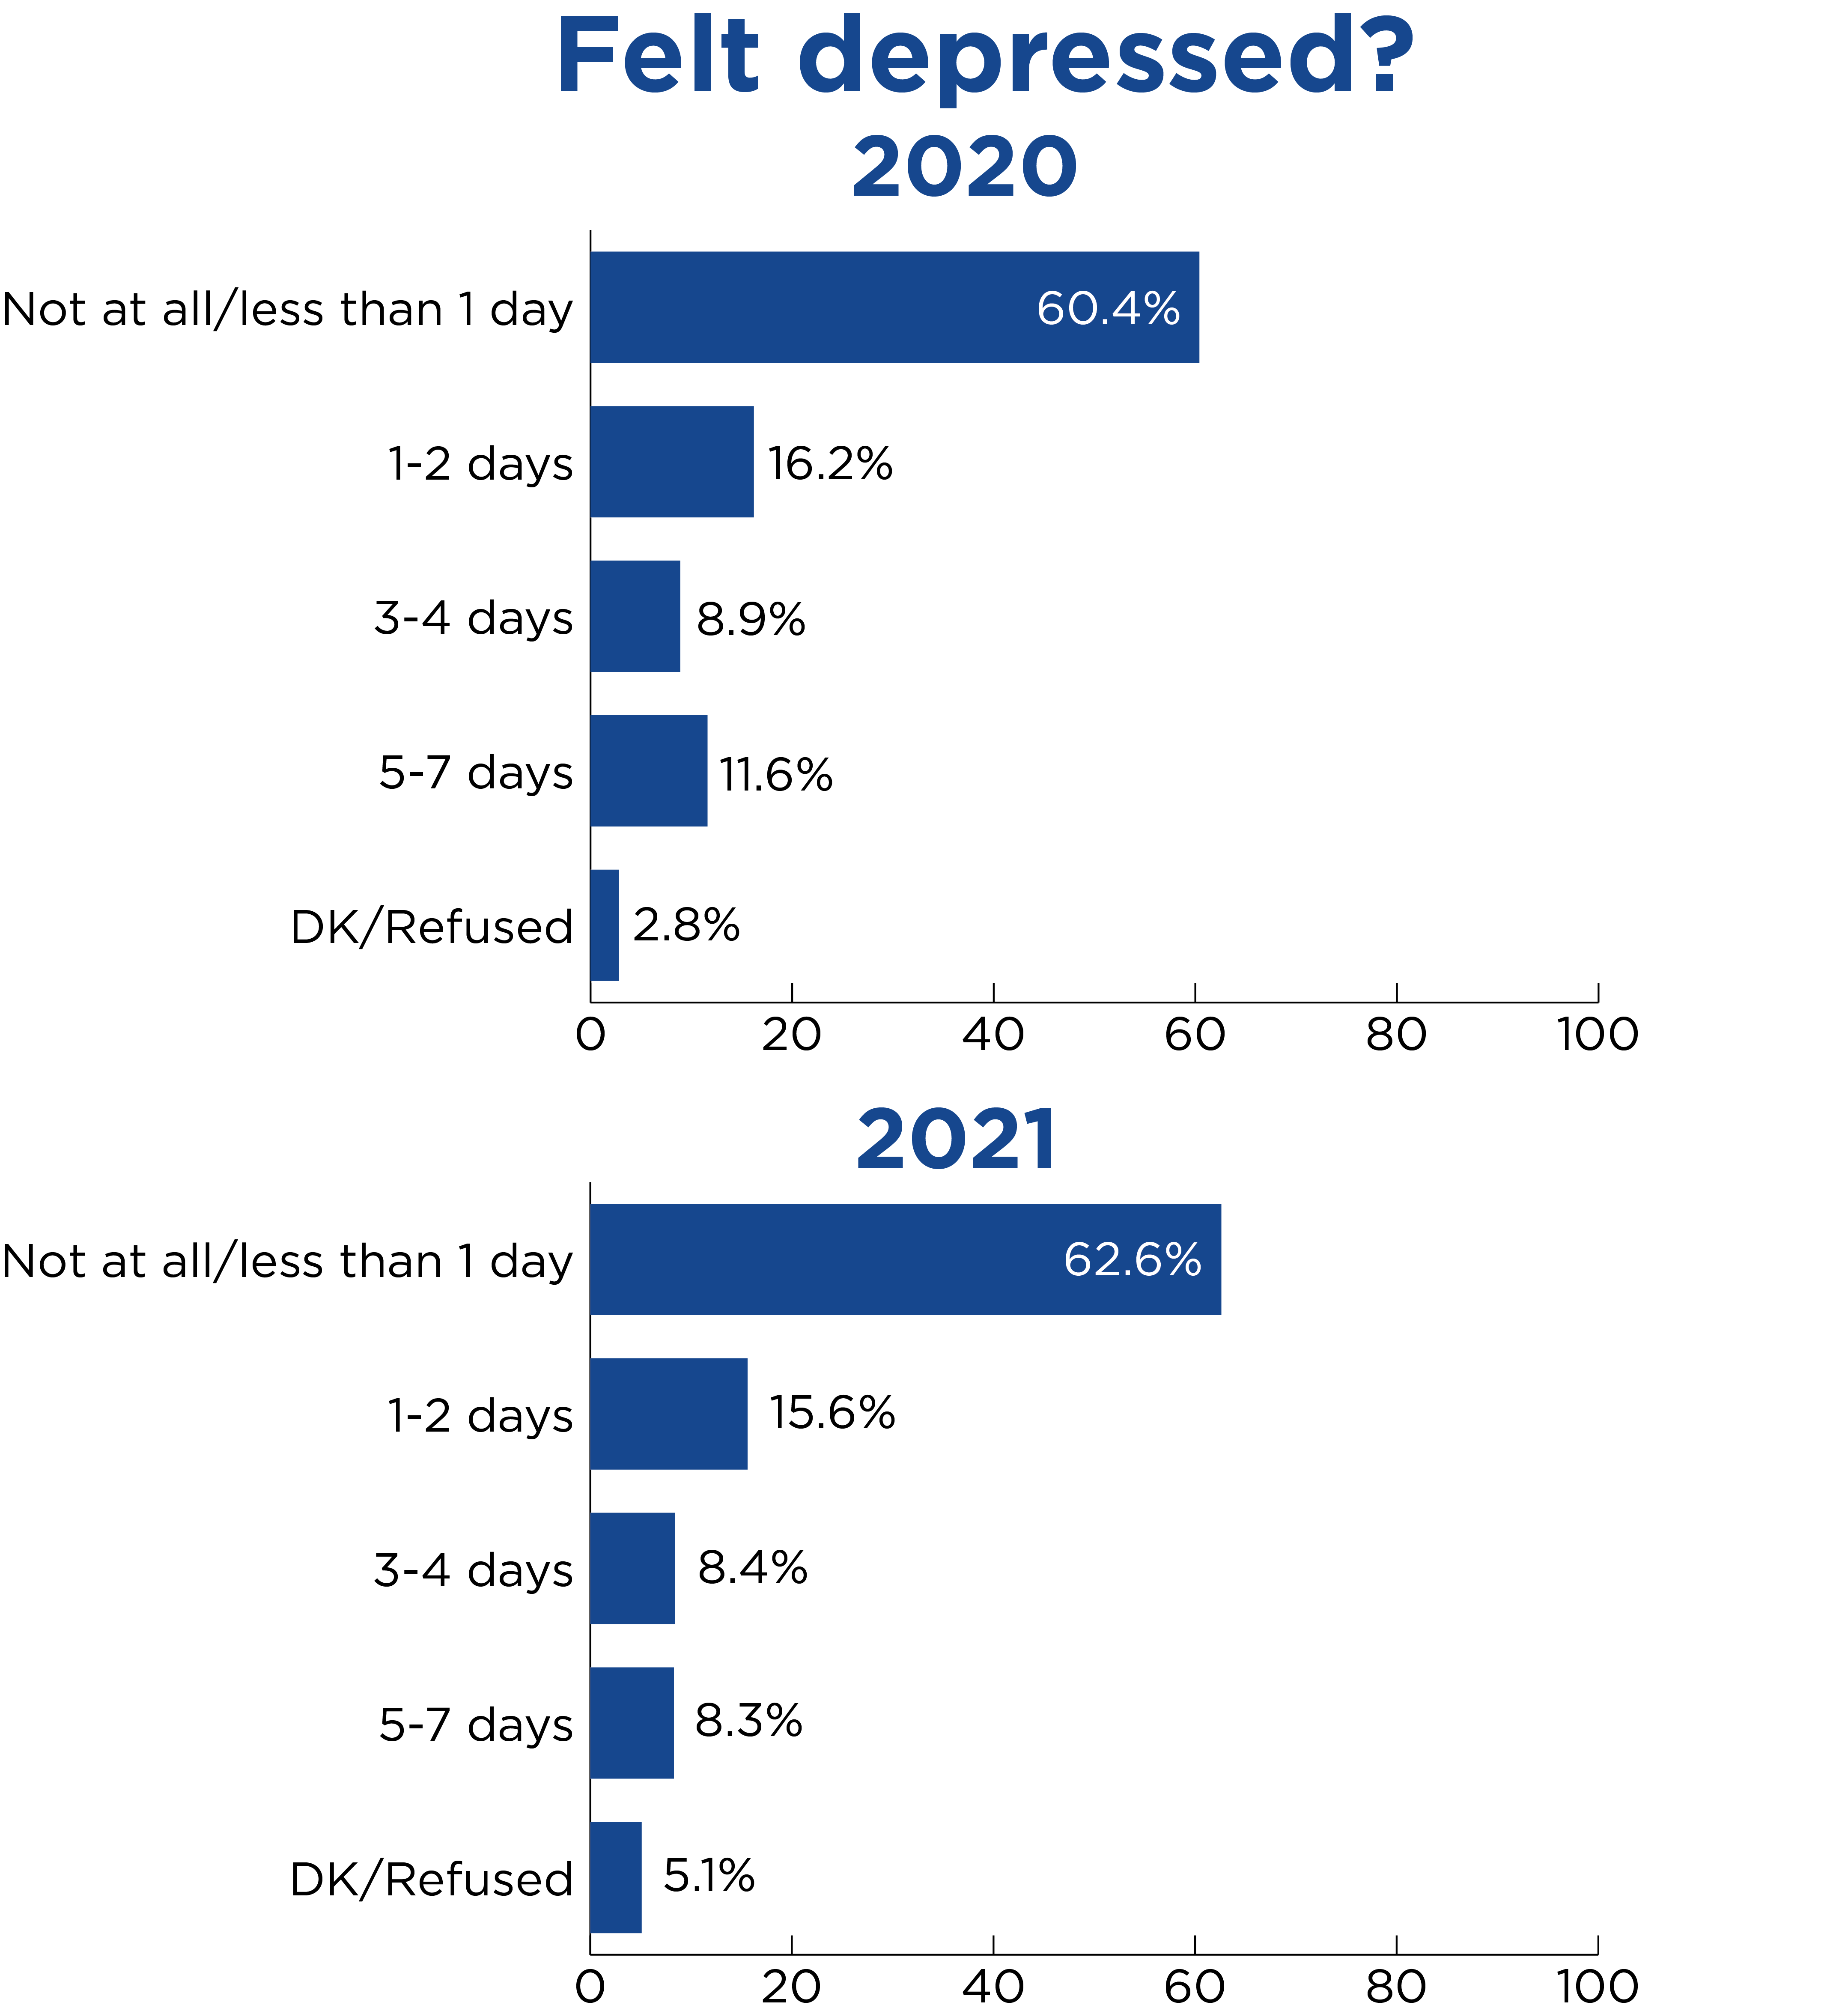 Bar graphs comparing 2020 and 2021